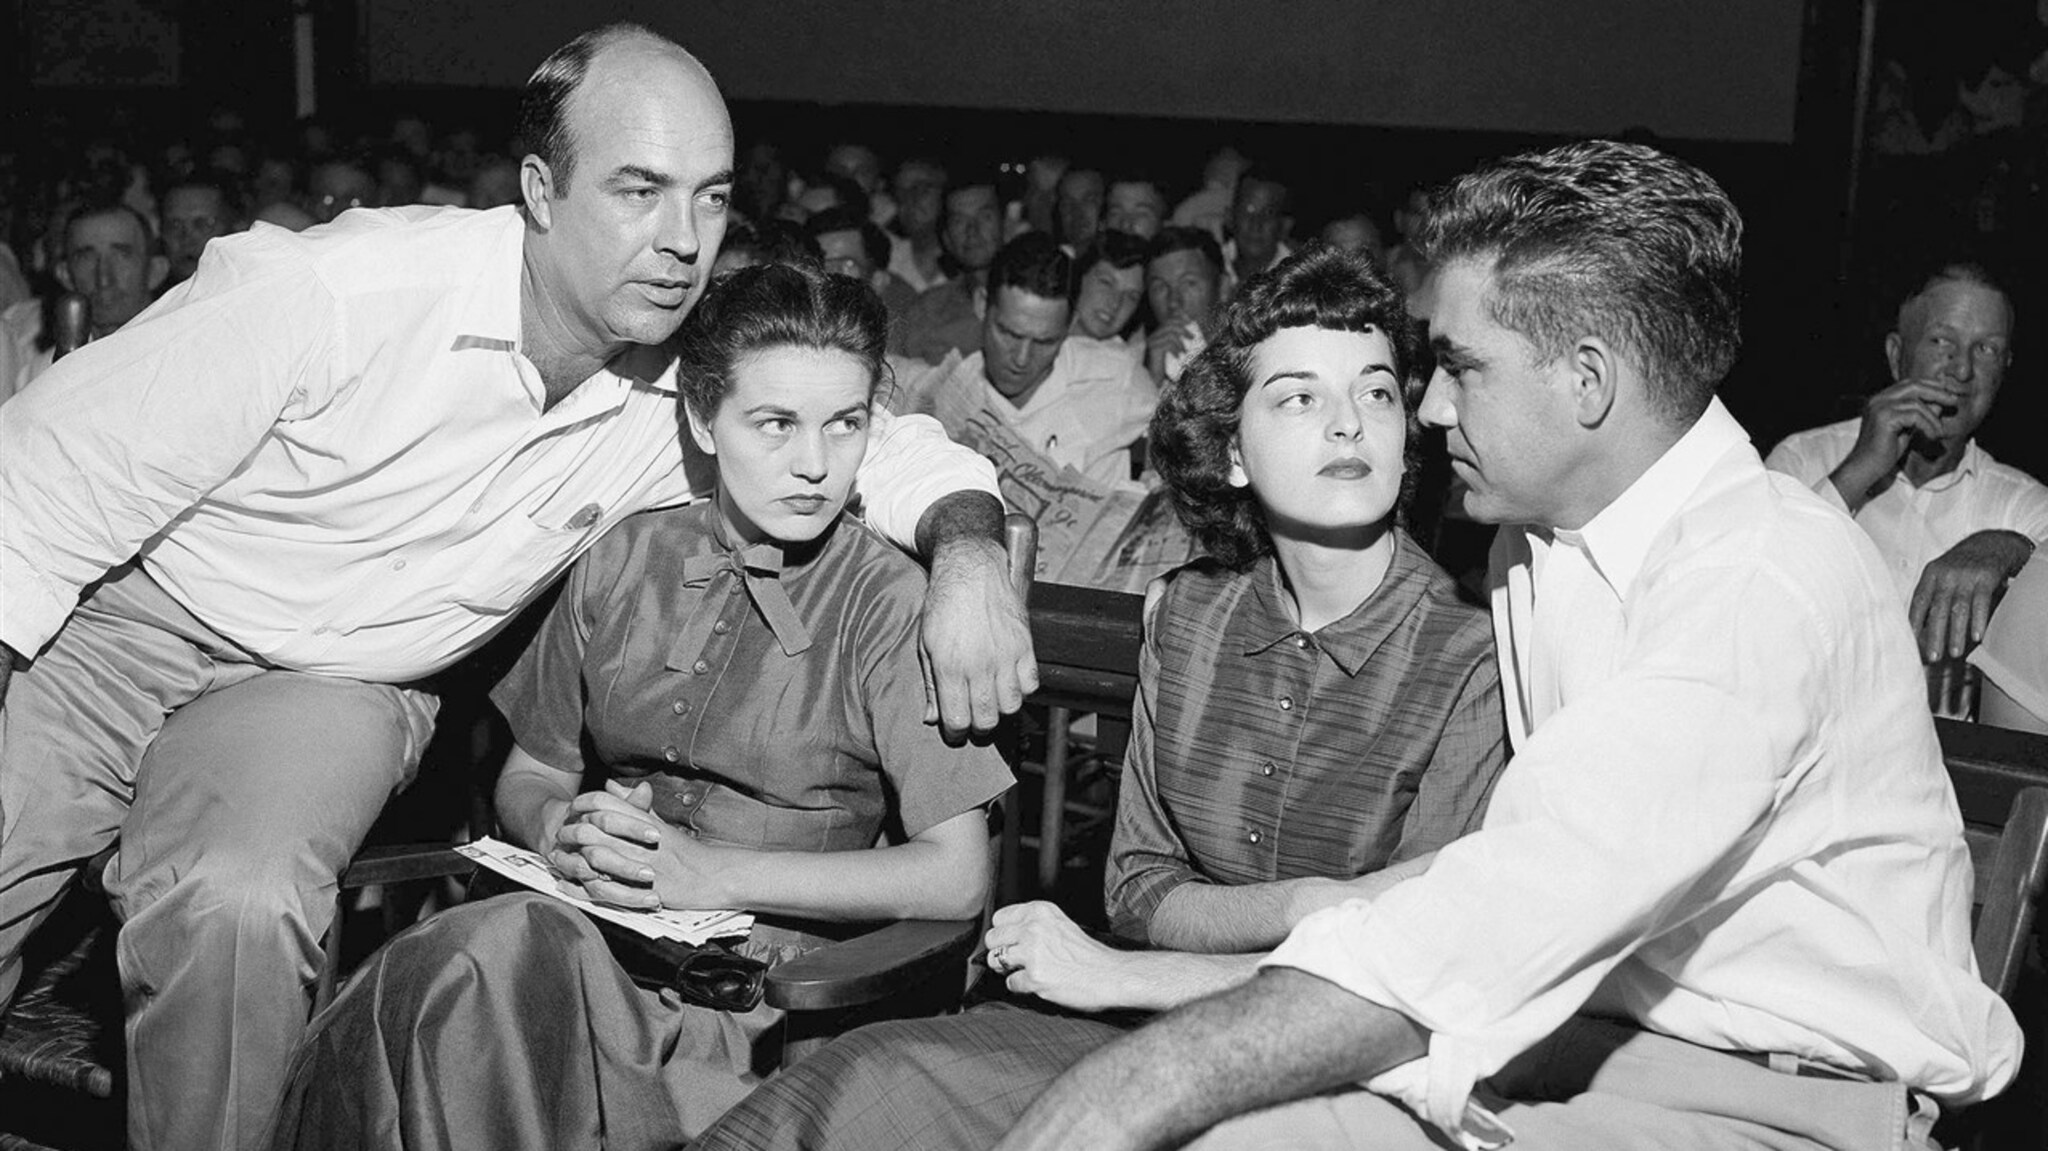 United States: A woman who accused Emmett Till of murder has died